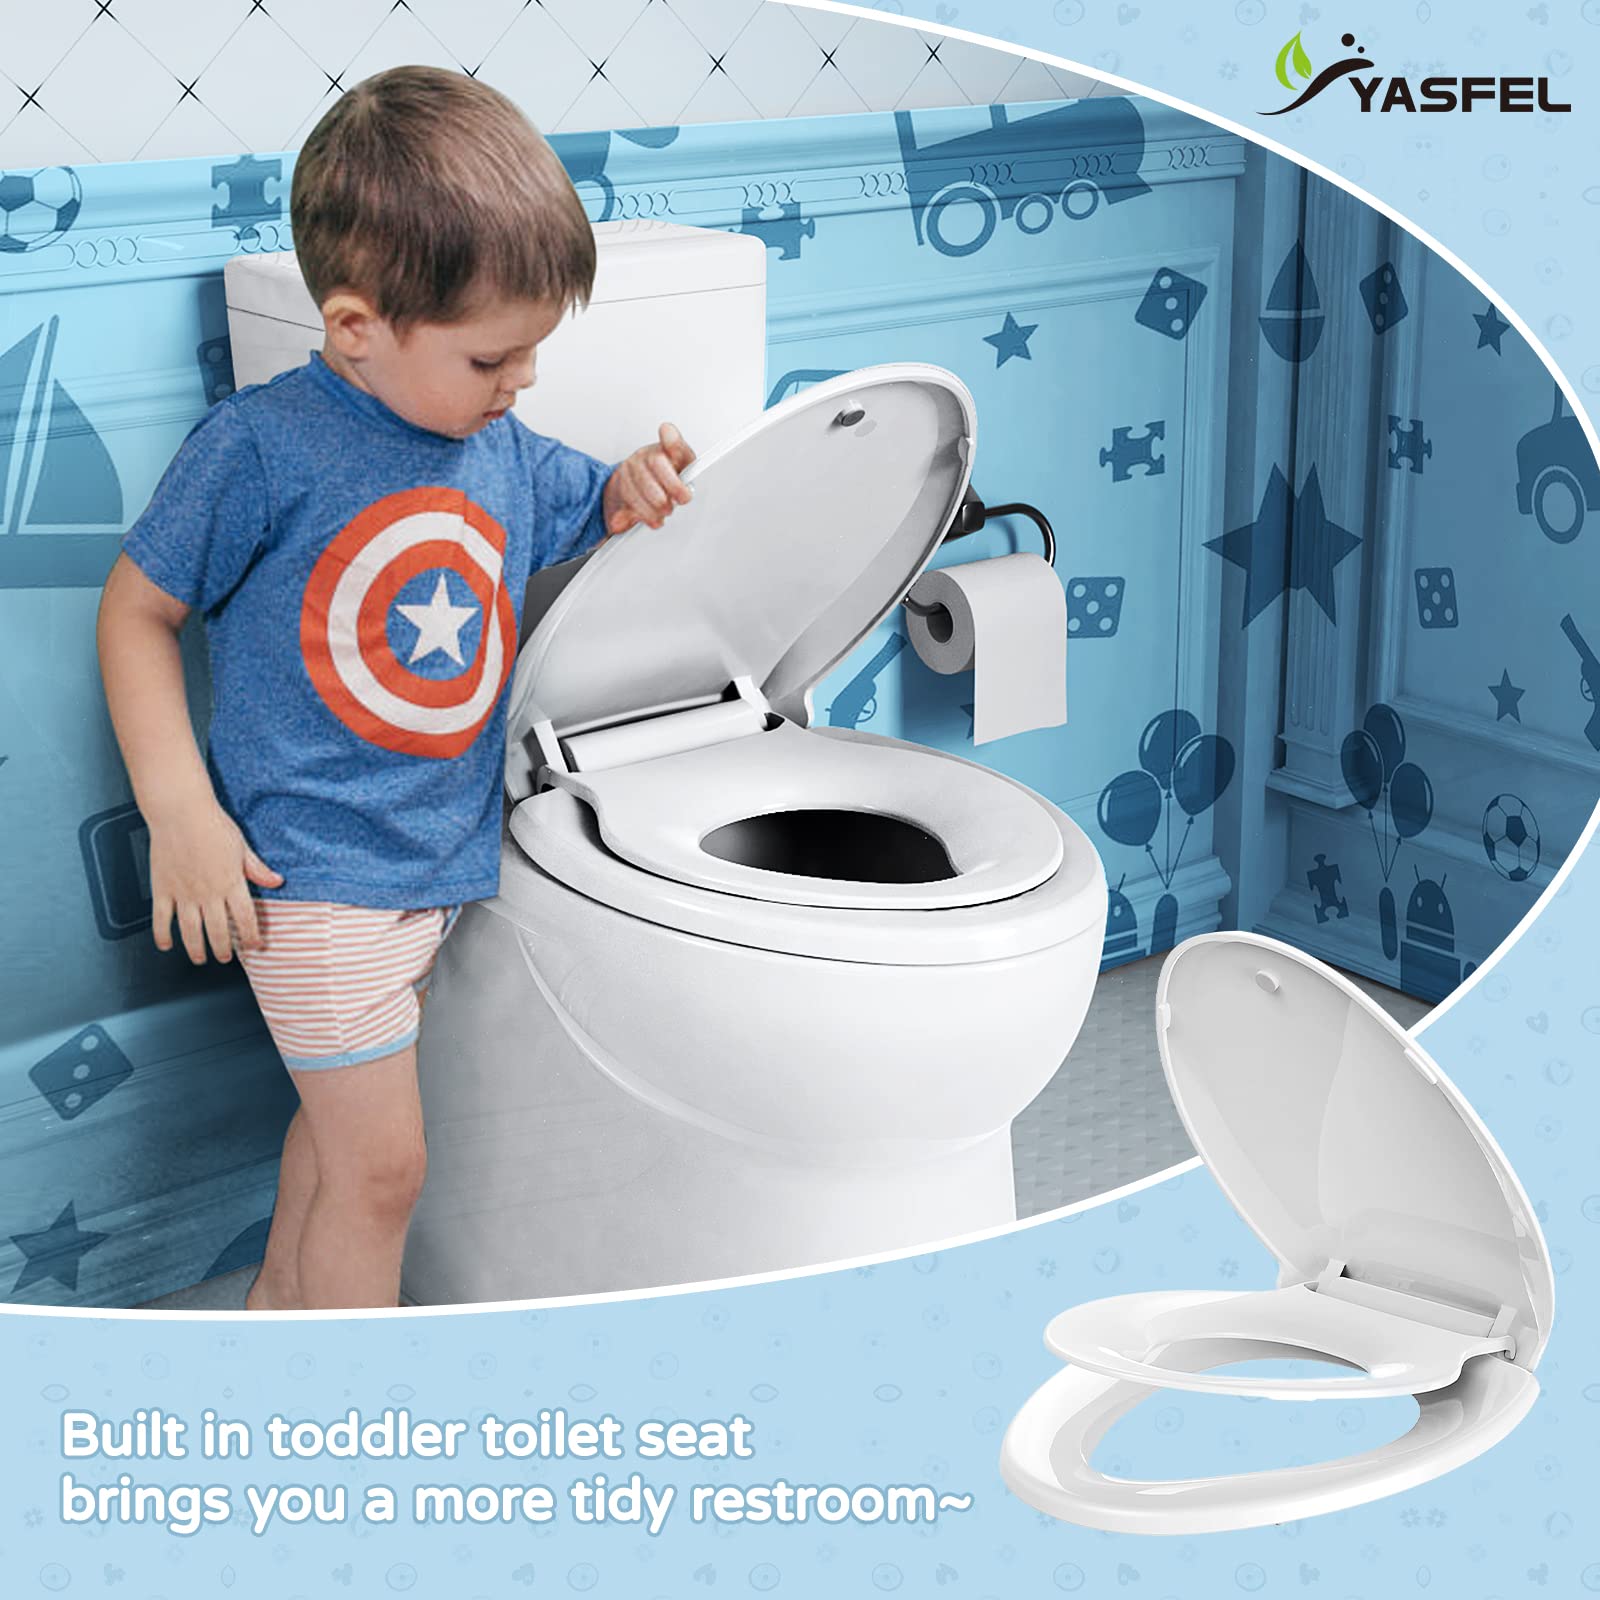 YASFEL Toilet Seat with Toddler Toilet Seat Built in, Plastic, Elongated Slow Close with Magnets For Potty Training For Kids & Adults (White, 18.5”)